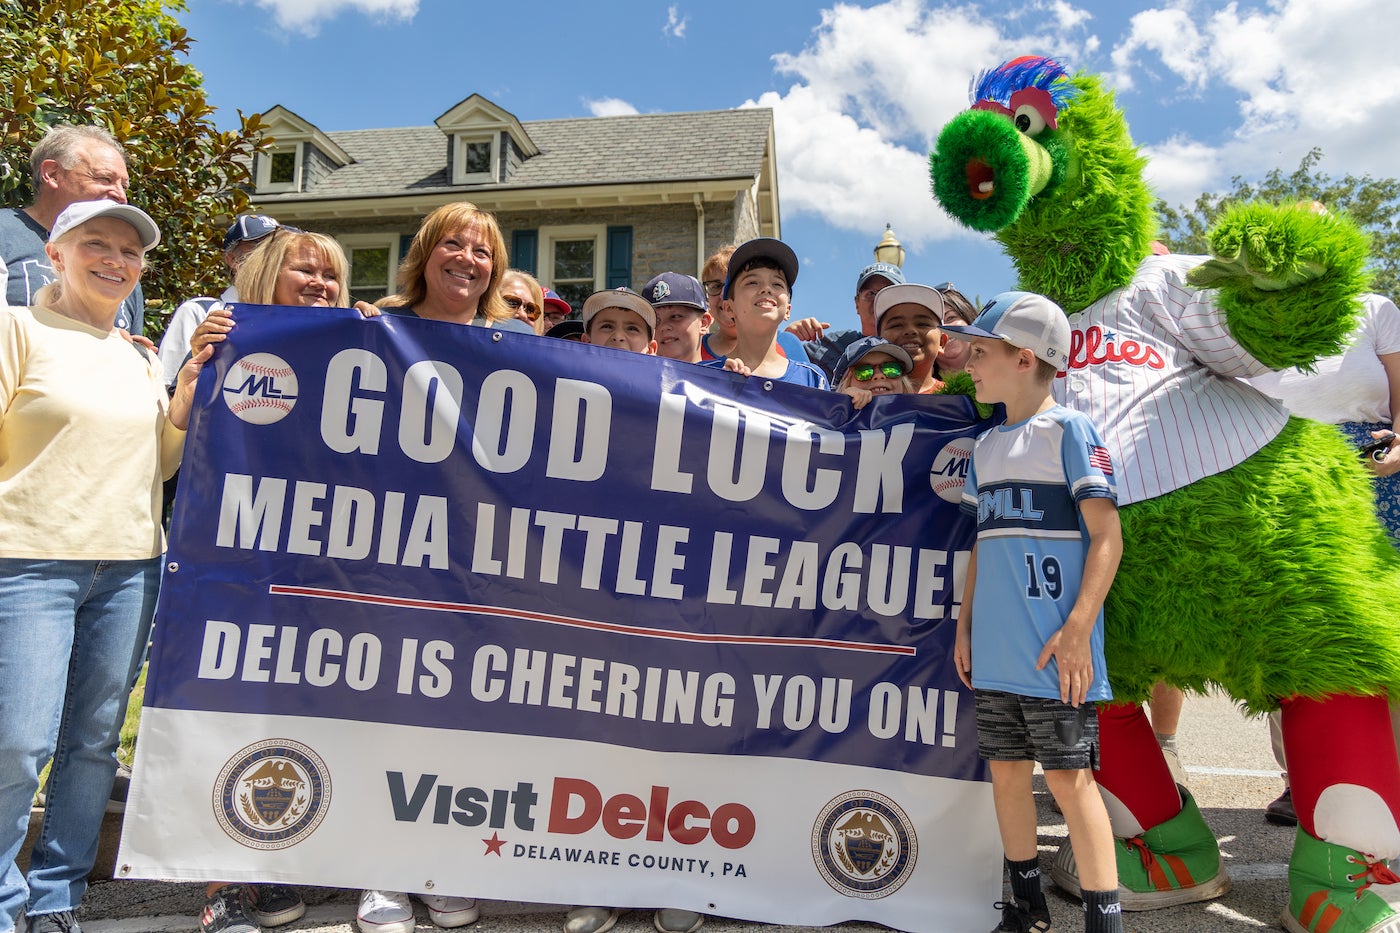 Williamsport Preps for the Little League World Series!